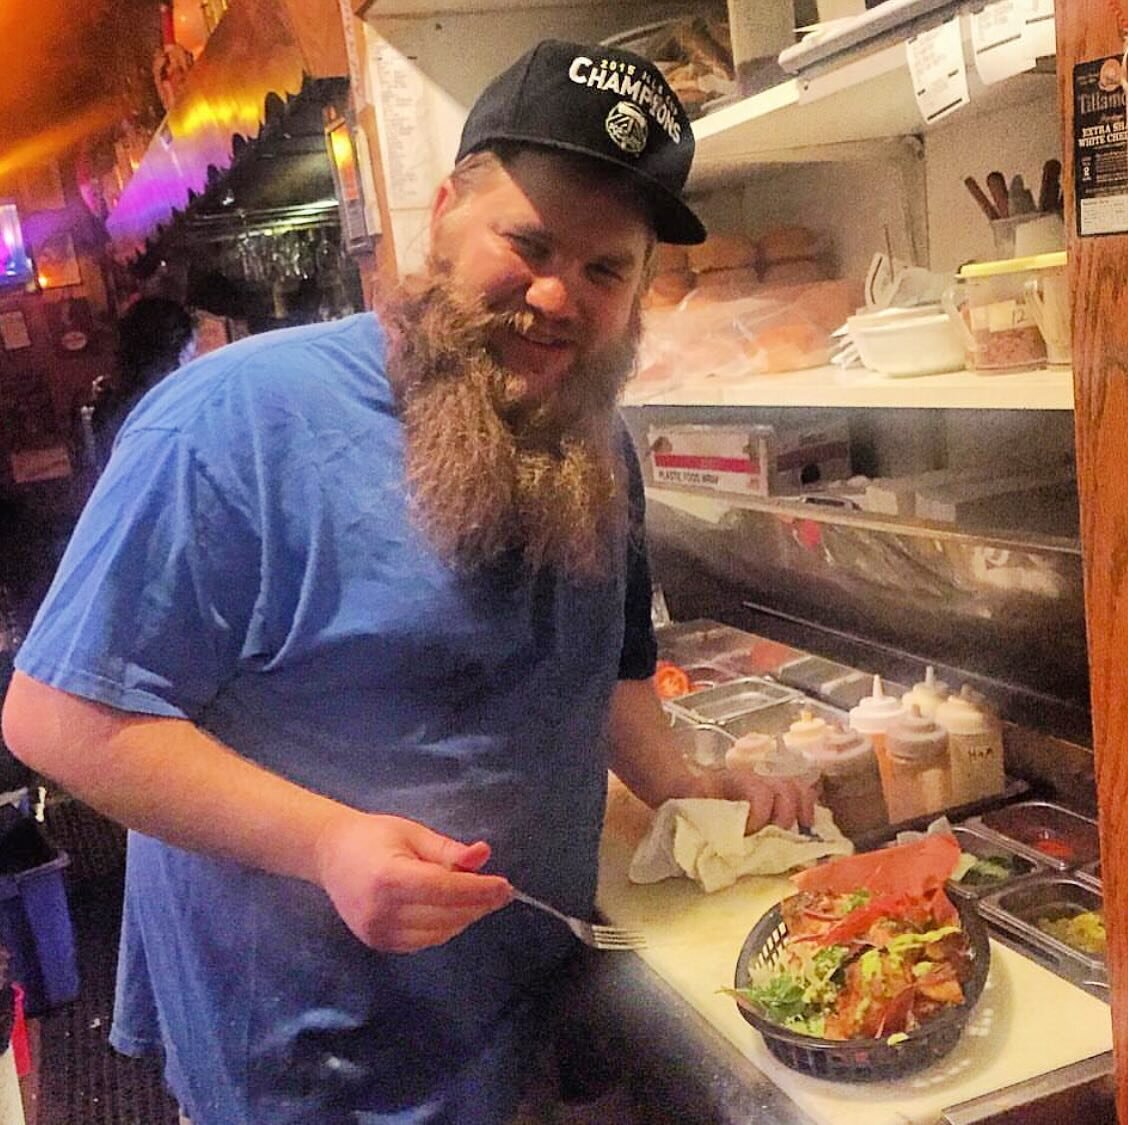 That one time in 2016 at club 21 that we brought Spencer some free Chicken And Guns #staffmeal ! You&rsquo;ll now find Spenser next-door at @bottlerocketburgers slinging even better hamburgers for himself! Here&rsquo;s to a good staff meal!